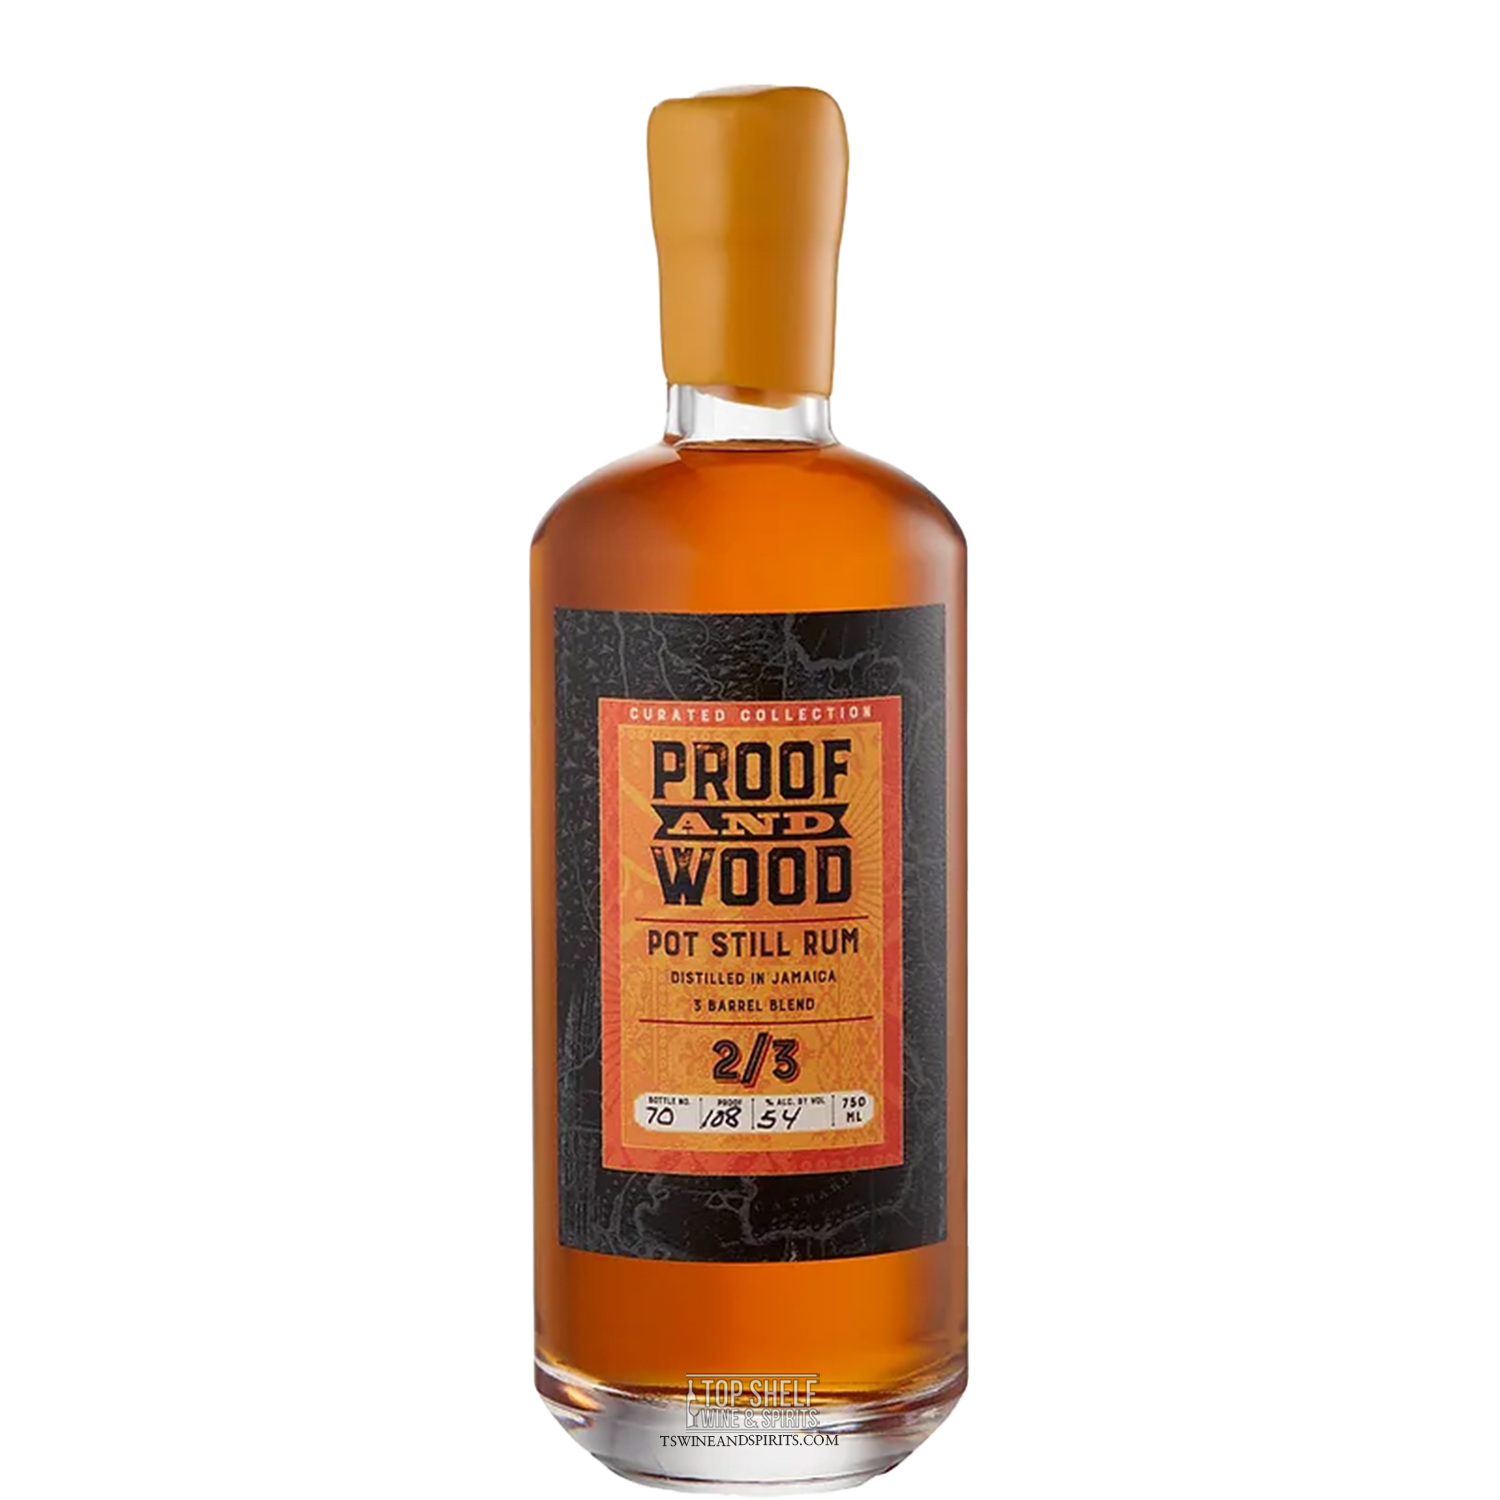 Proof and Wood 2/3 Pot Still Rum